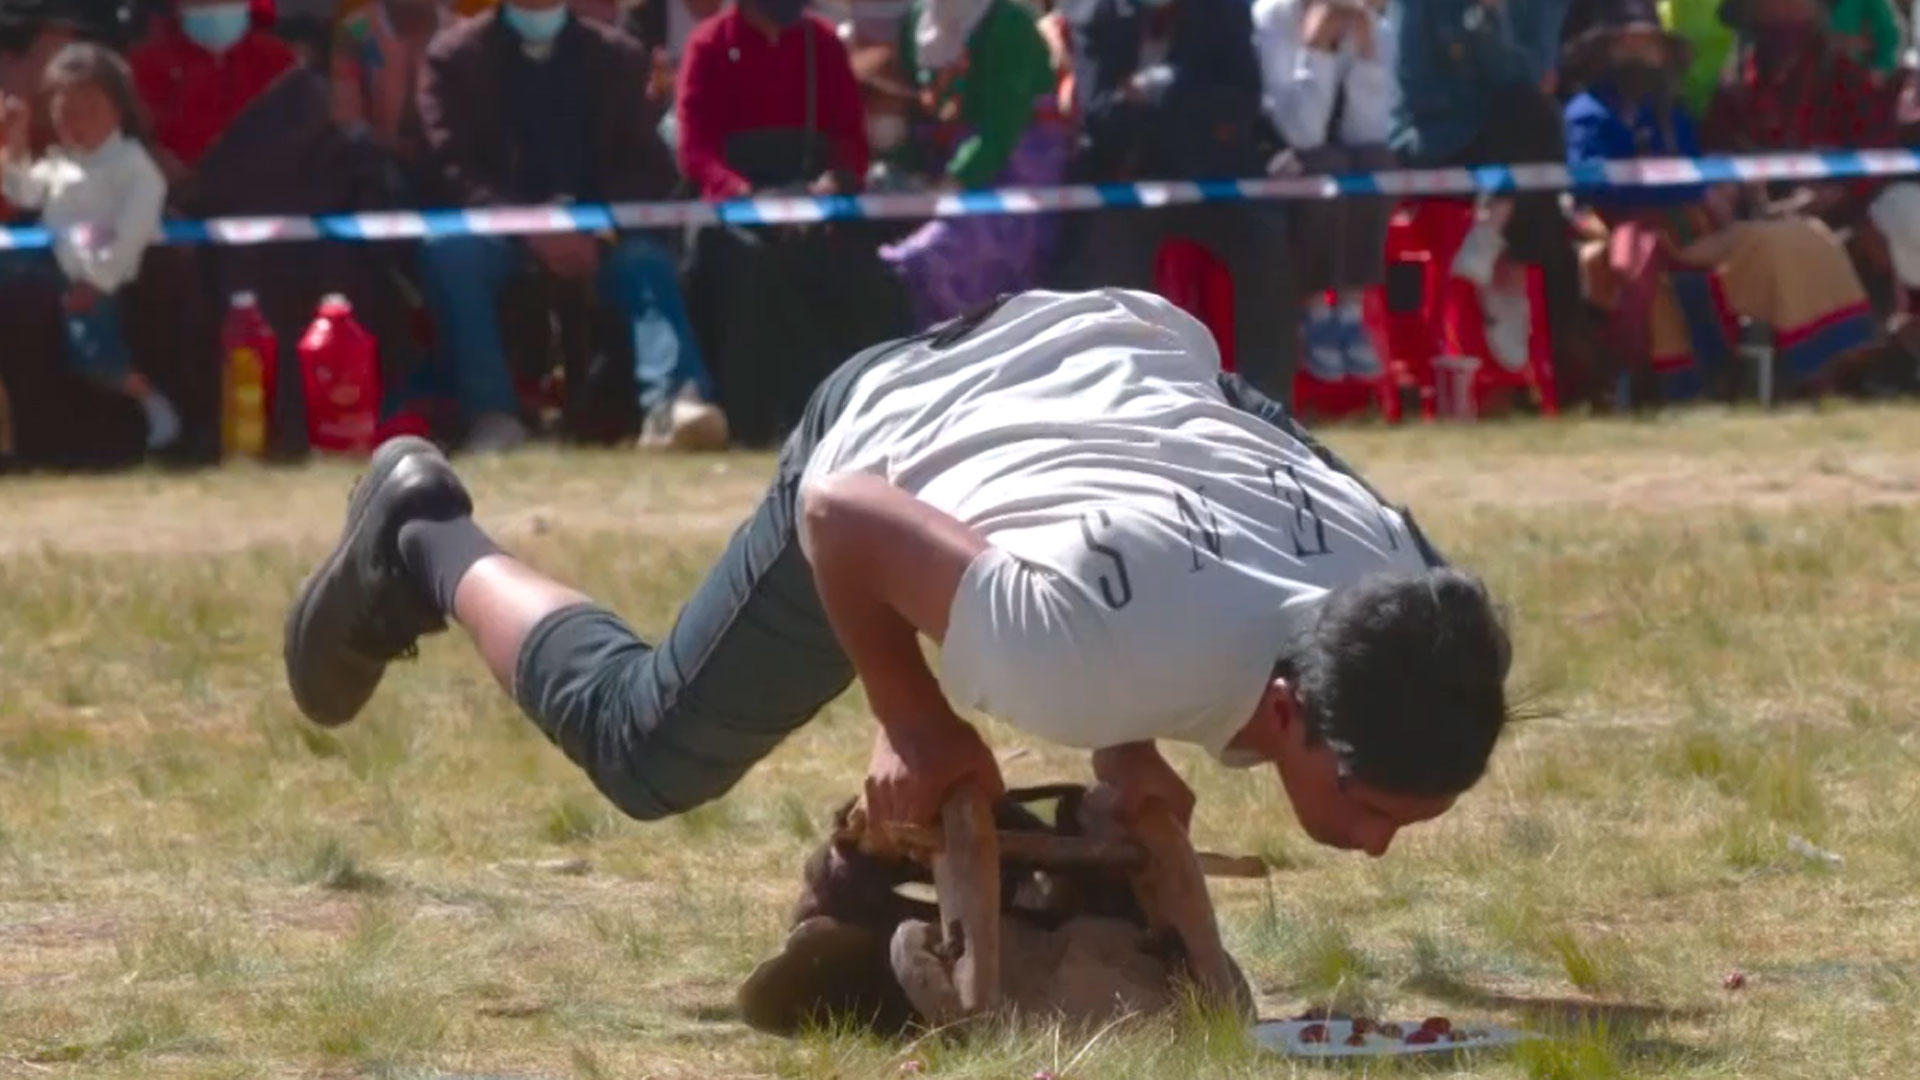 Traditional ethnic sport in China's Qinghai